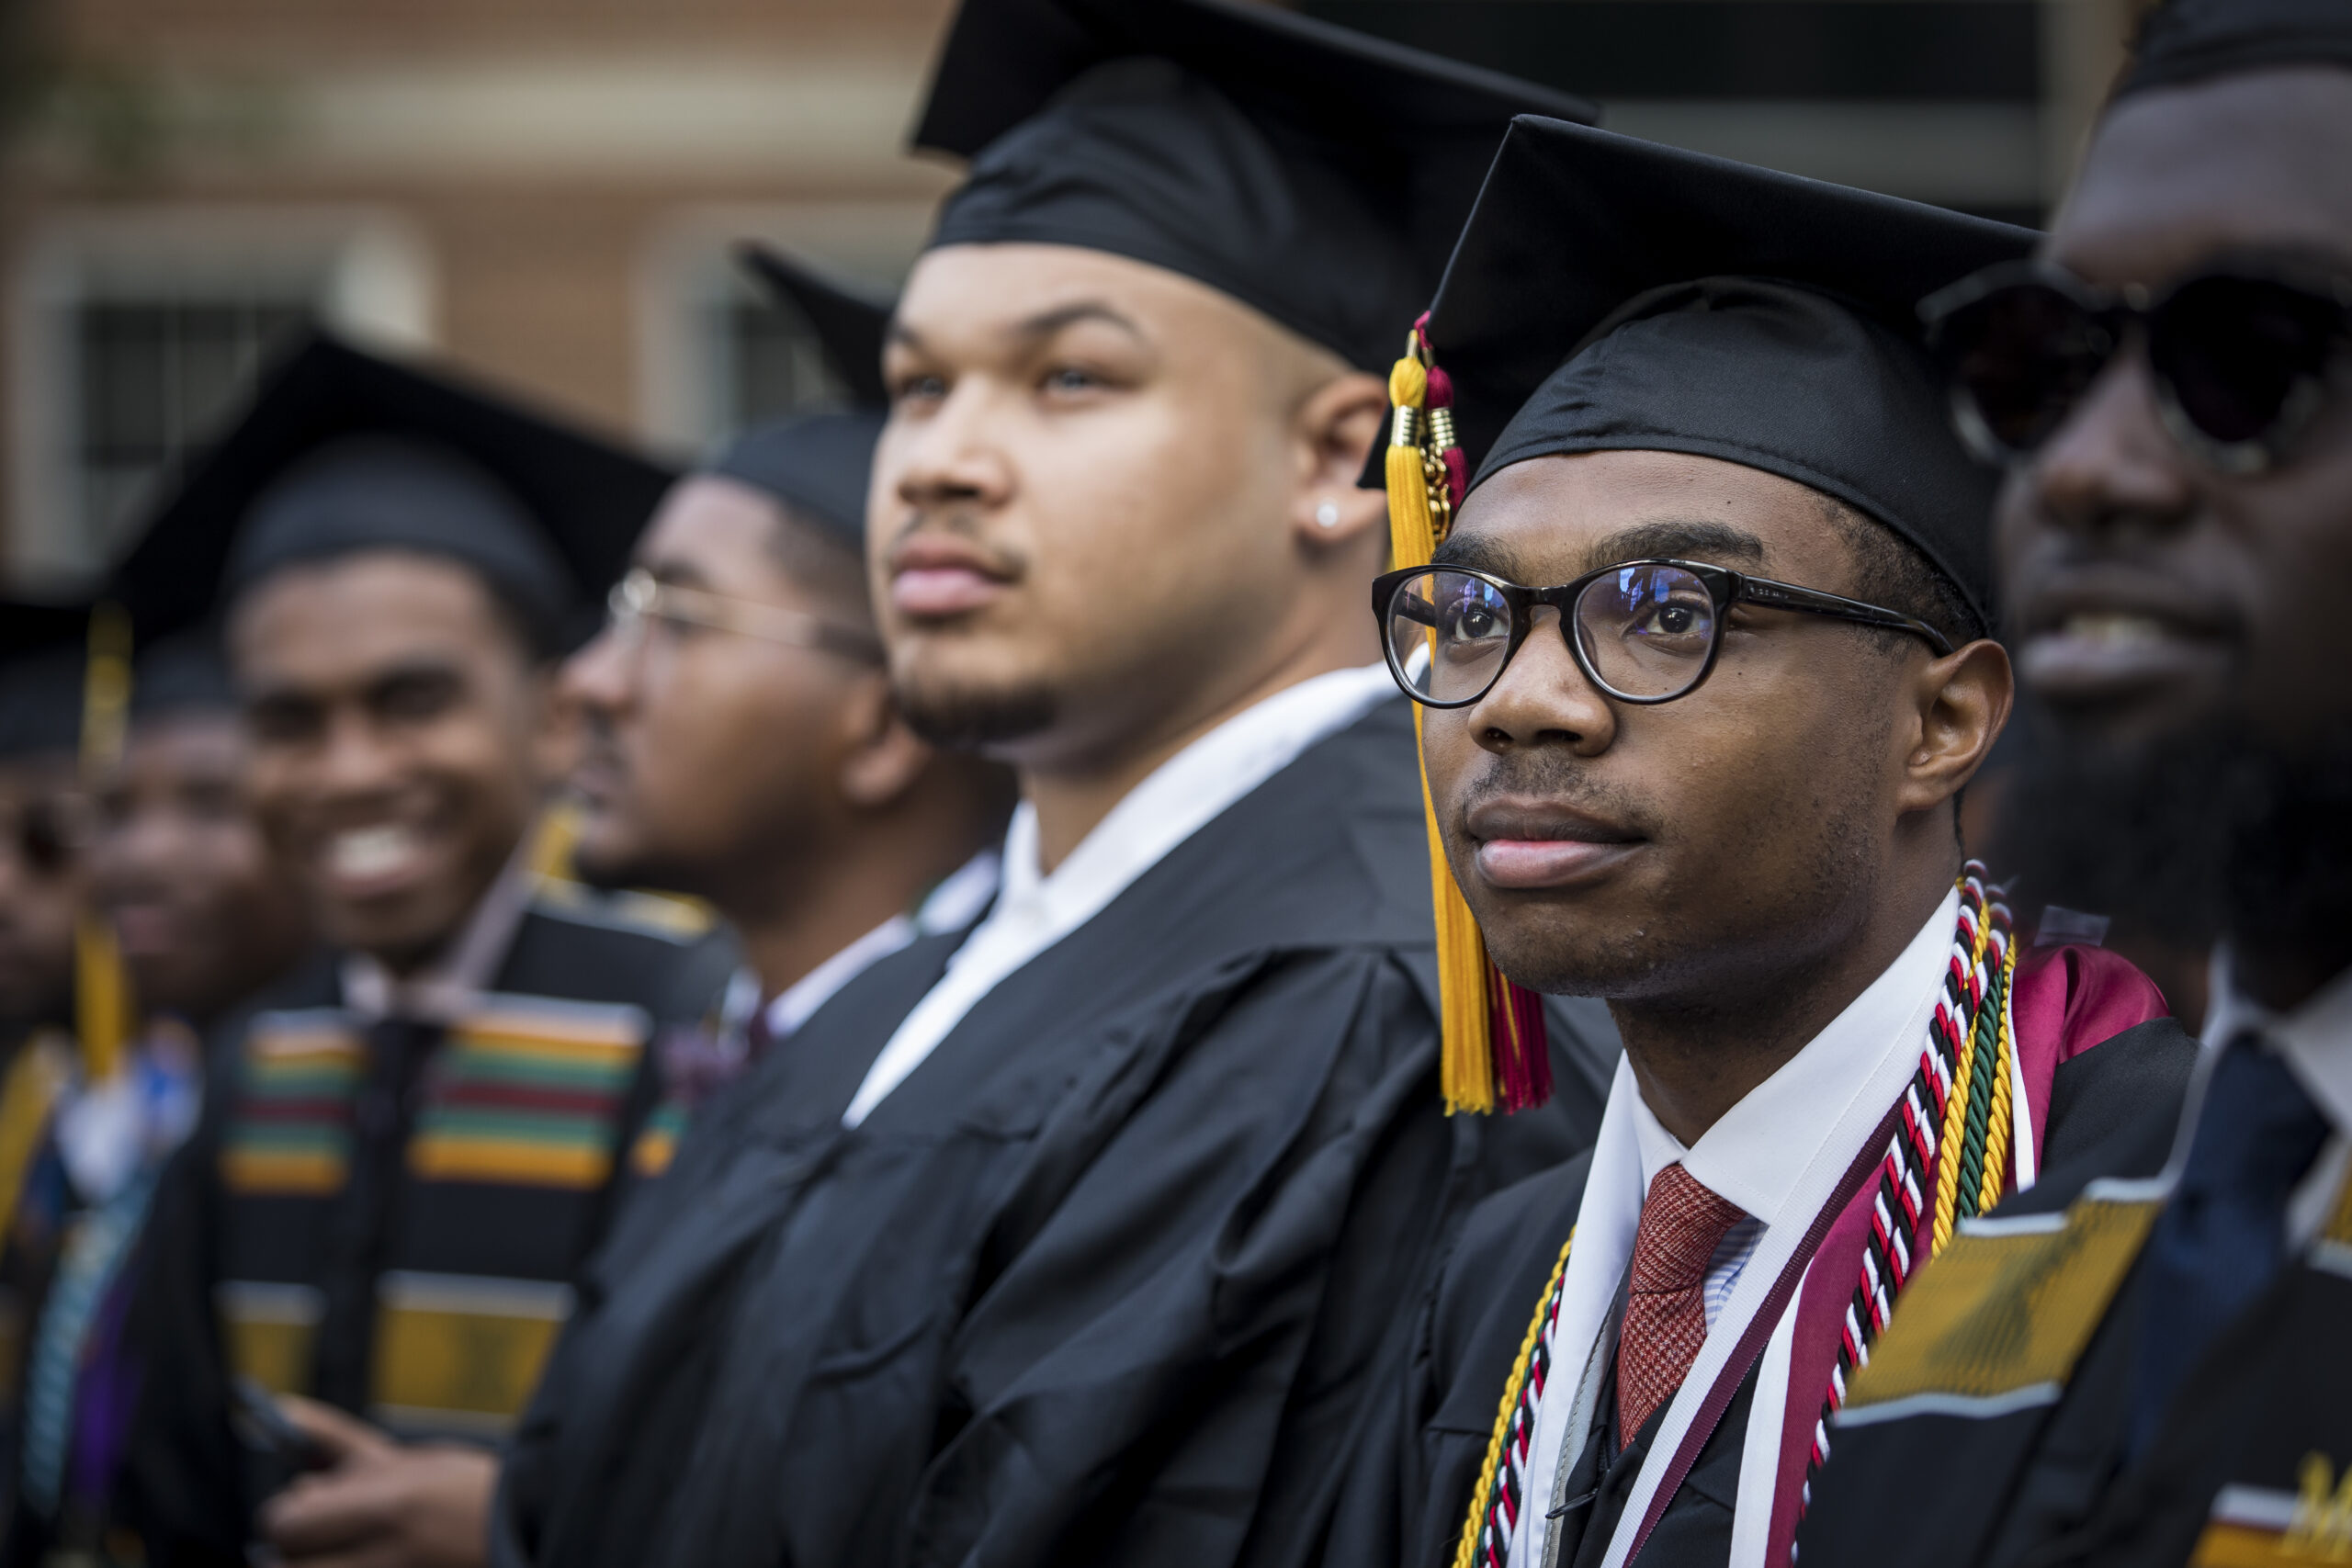 80 Million Donation To Fund Education For 400 Students At Morehouse